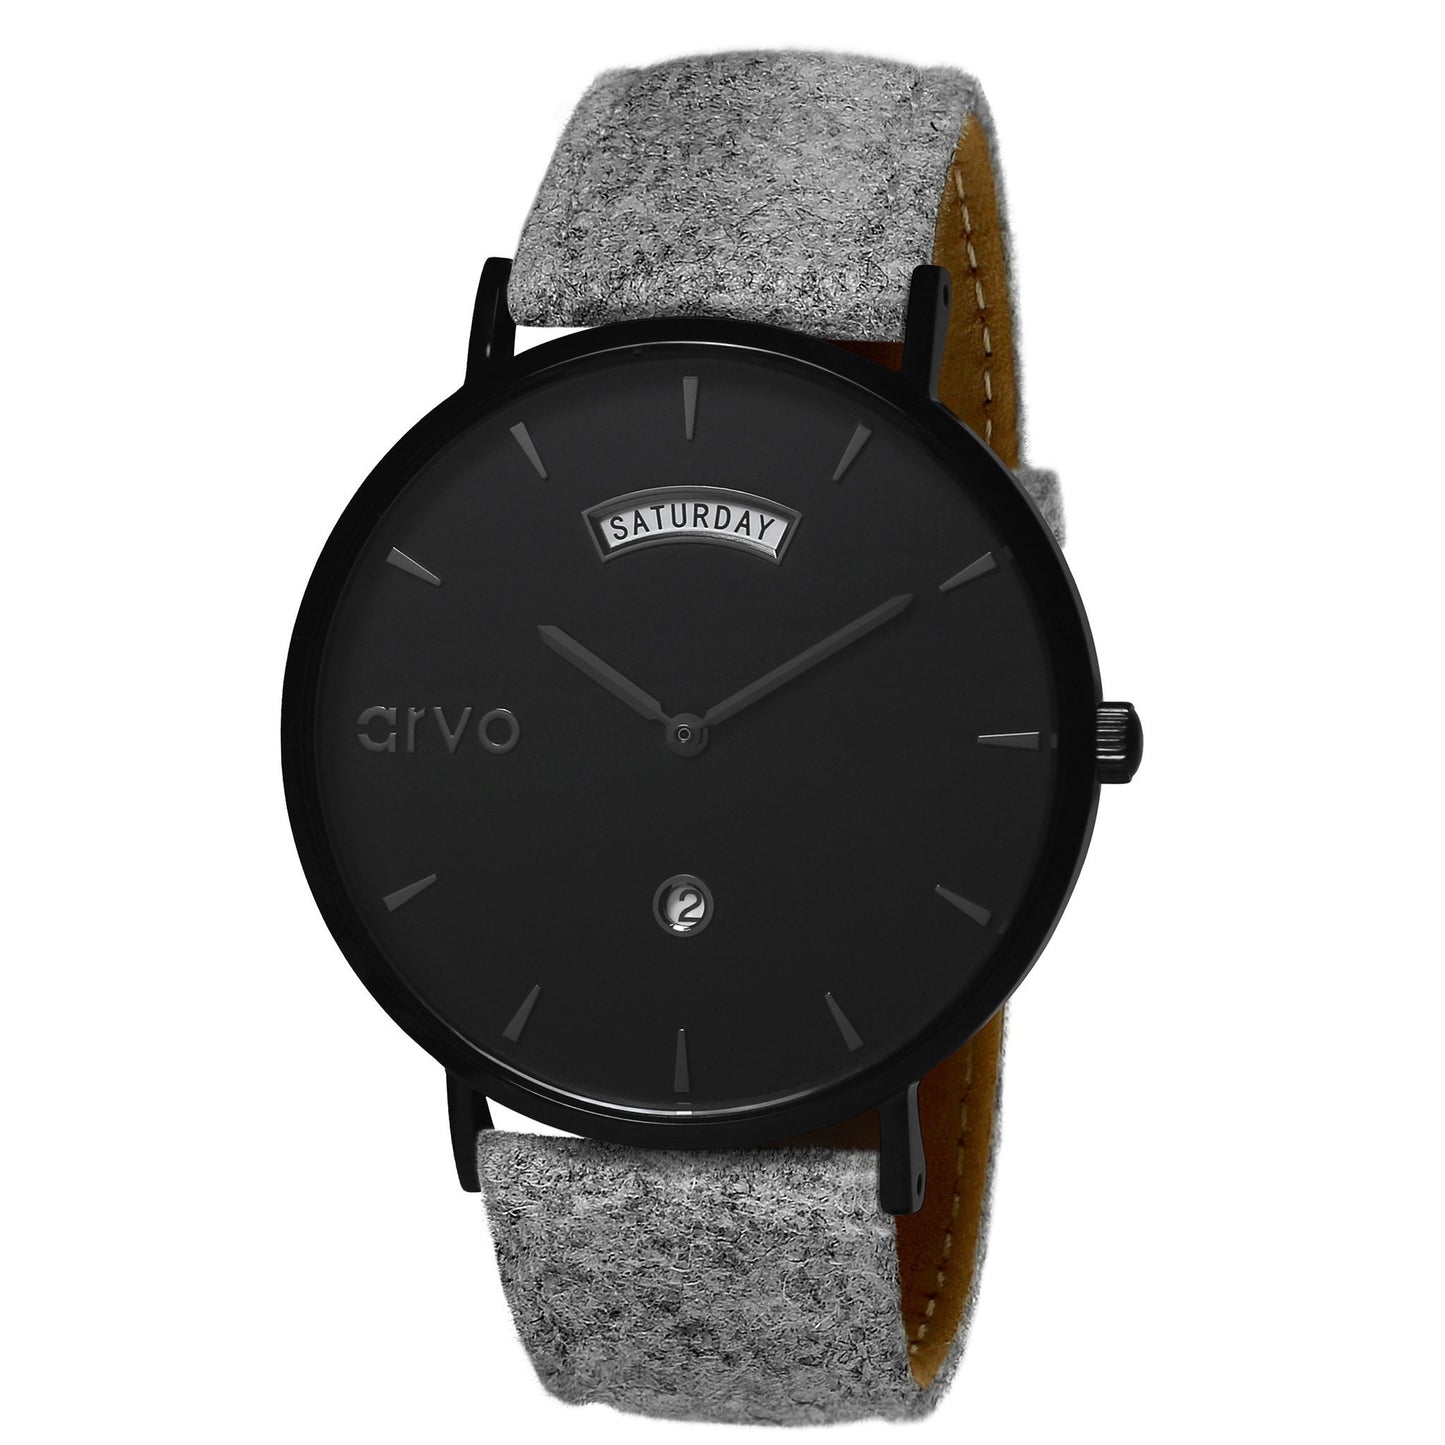 40mm Arvo Black Awristacrat Watch with a black dial and case and a great felt watch band - For men and women